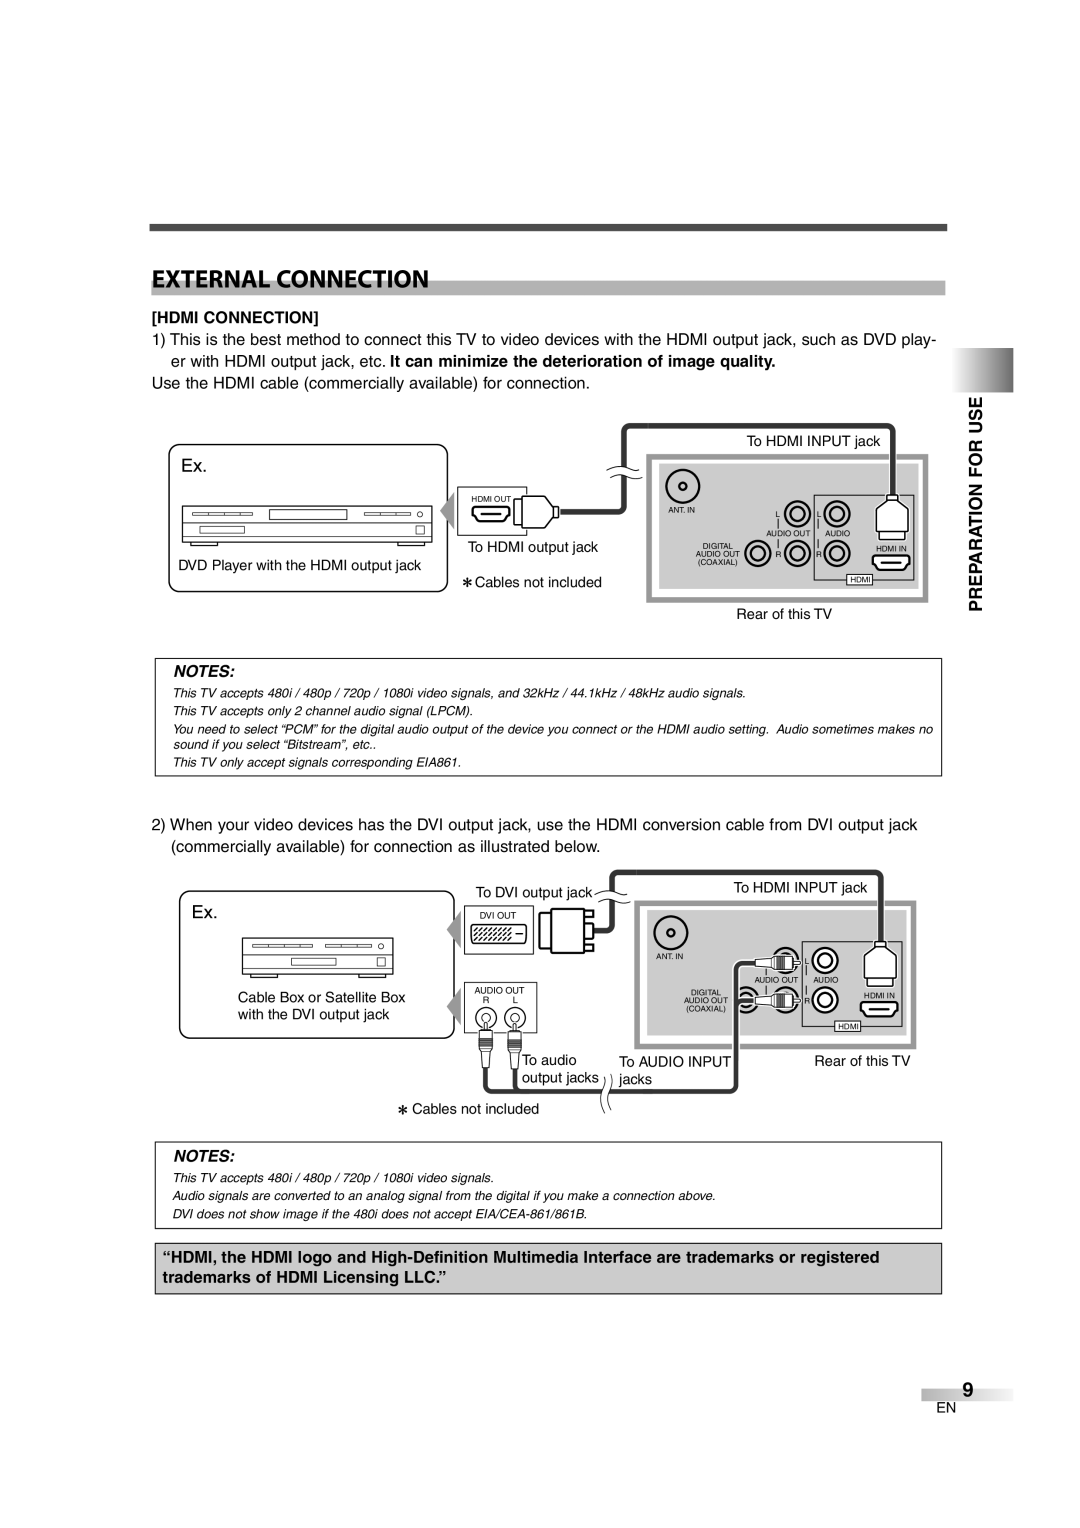 FUNAI CIWL3206 owner manual External Connection, Preparation For Use, Hdmi Connection 